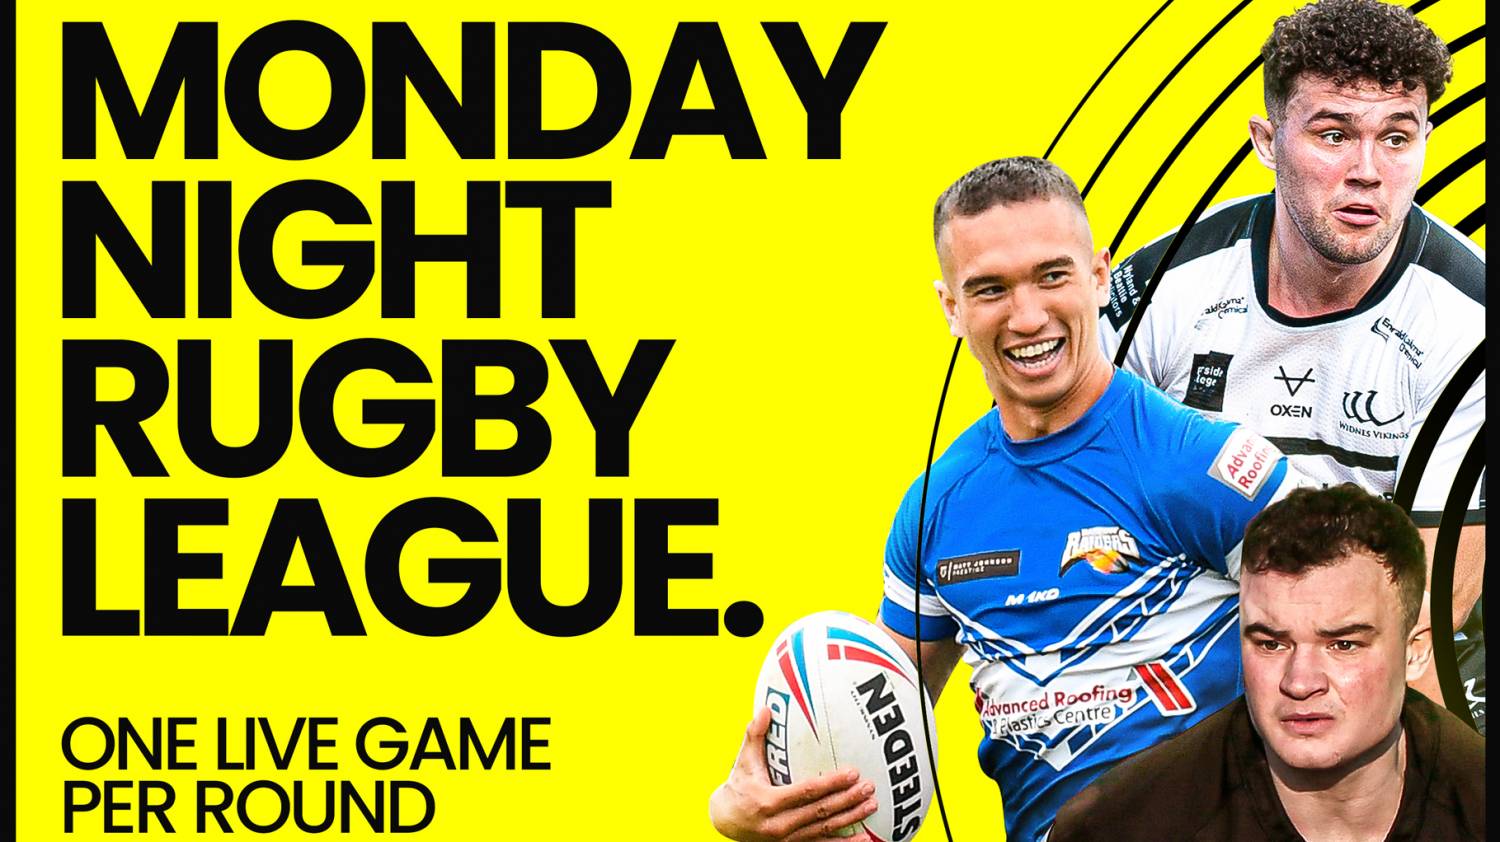 MONDAY NIGHT RUGBY LEAGUE COMING TO PREMIER SPORTS